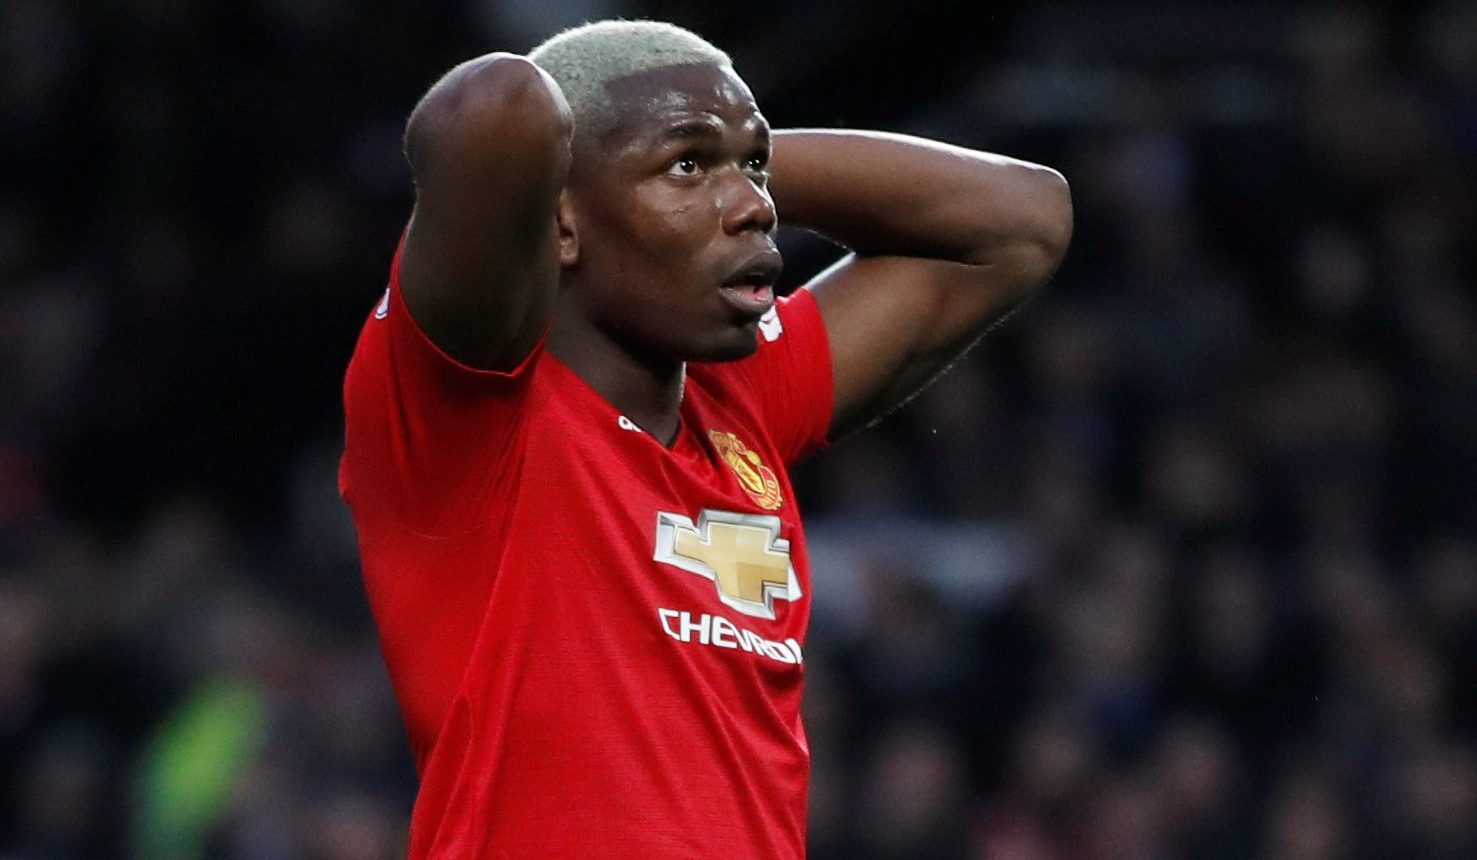 Soccer Football - Premier League - Manchester United v Southampton - Old Trafford, Manchester, Britain - March 2, 2019  Manchester United's Paul Pogba looks dejected    Action Images via Reuters/Carl Recine  EDITORIAL USE ONLY. No use with unauthorized audio, video, data, fixture lists, club/league logos or 